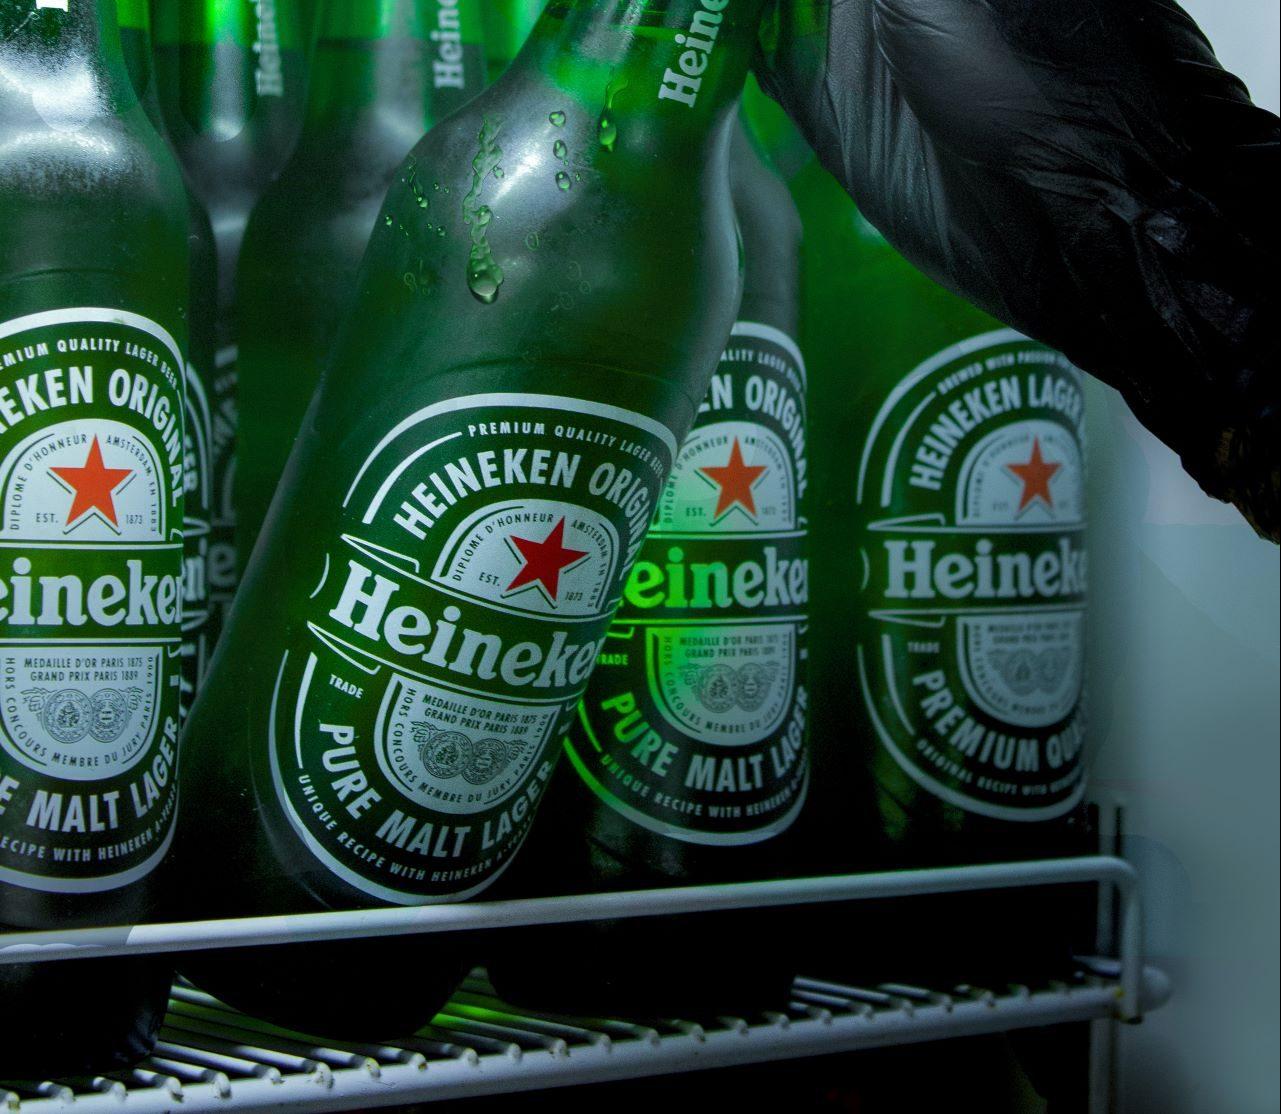 Heineken sells more than 300 brands and employs 85,000 people globally. Photo: Pexels